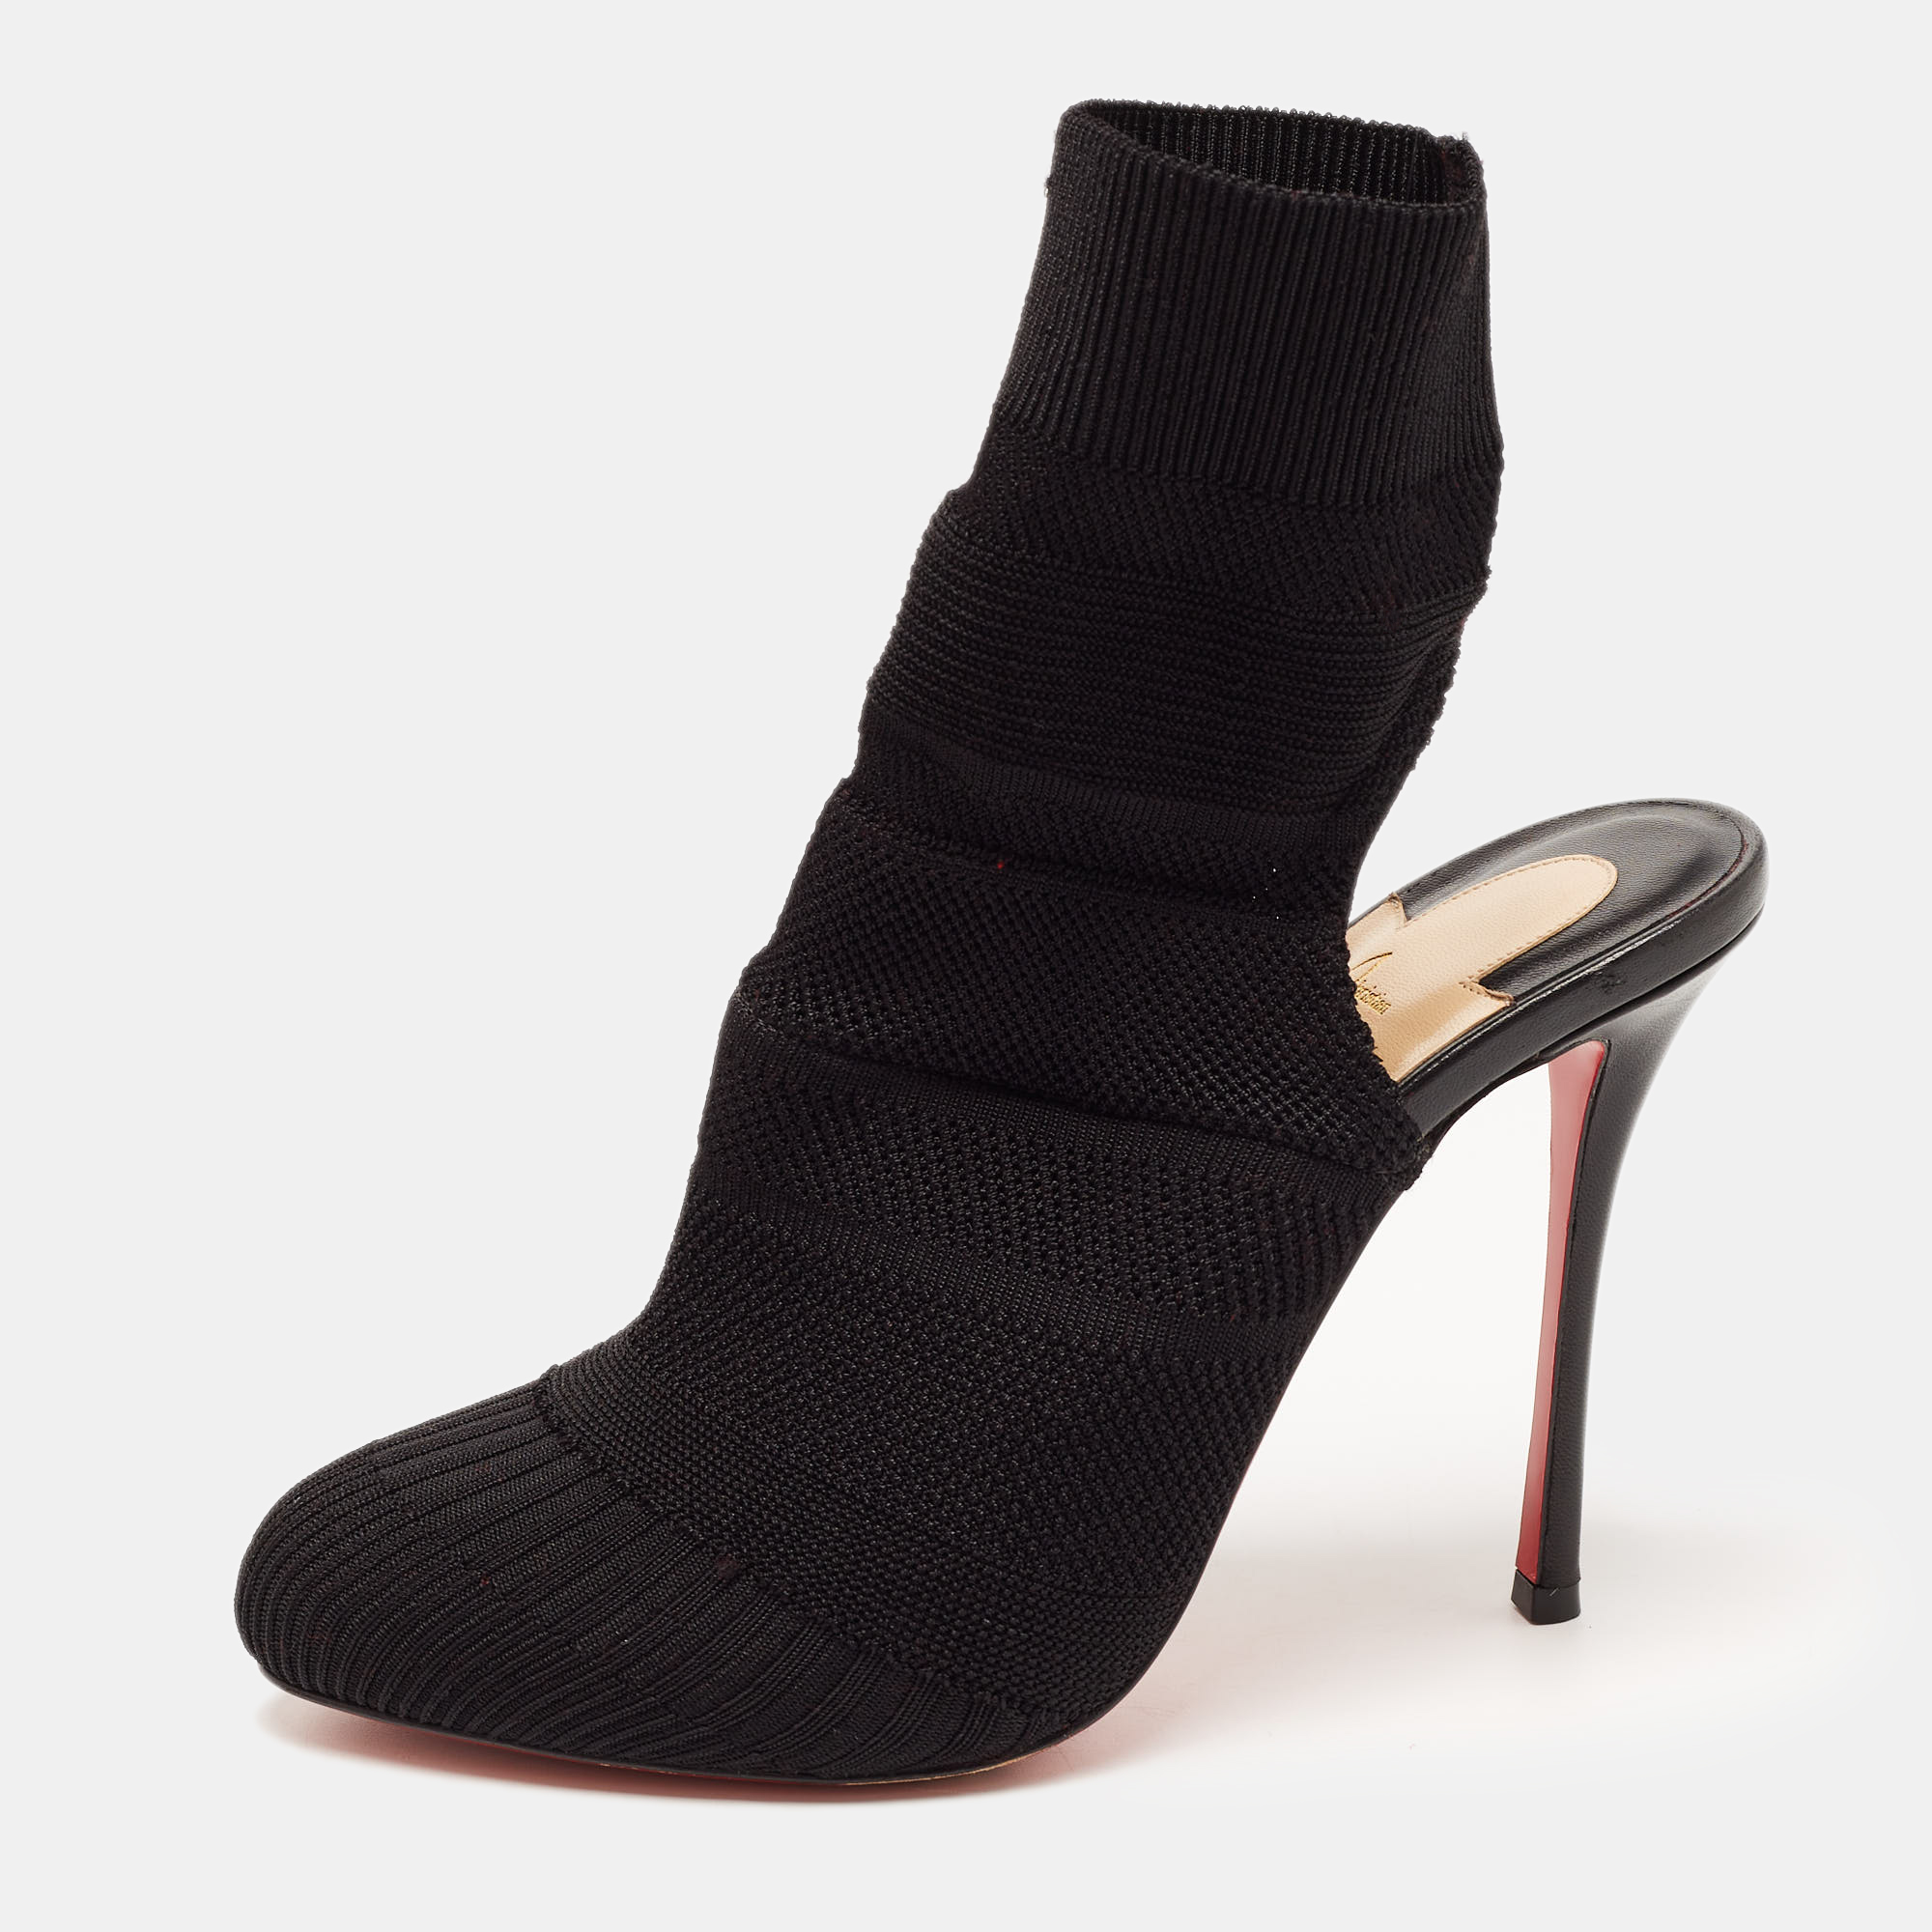 Christian Louboutin Black Knit Fabric Cheminetta Ankle Boots Size 39